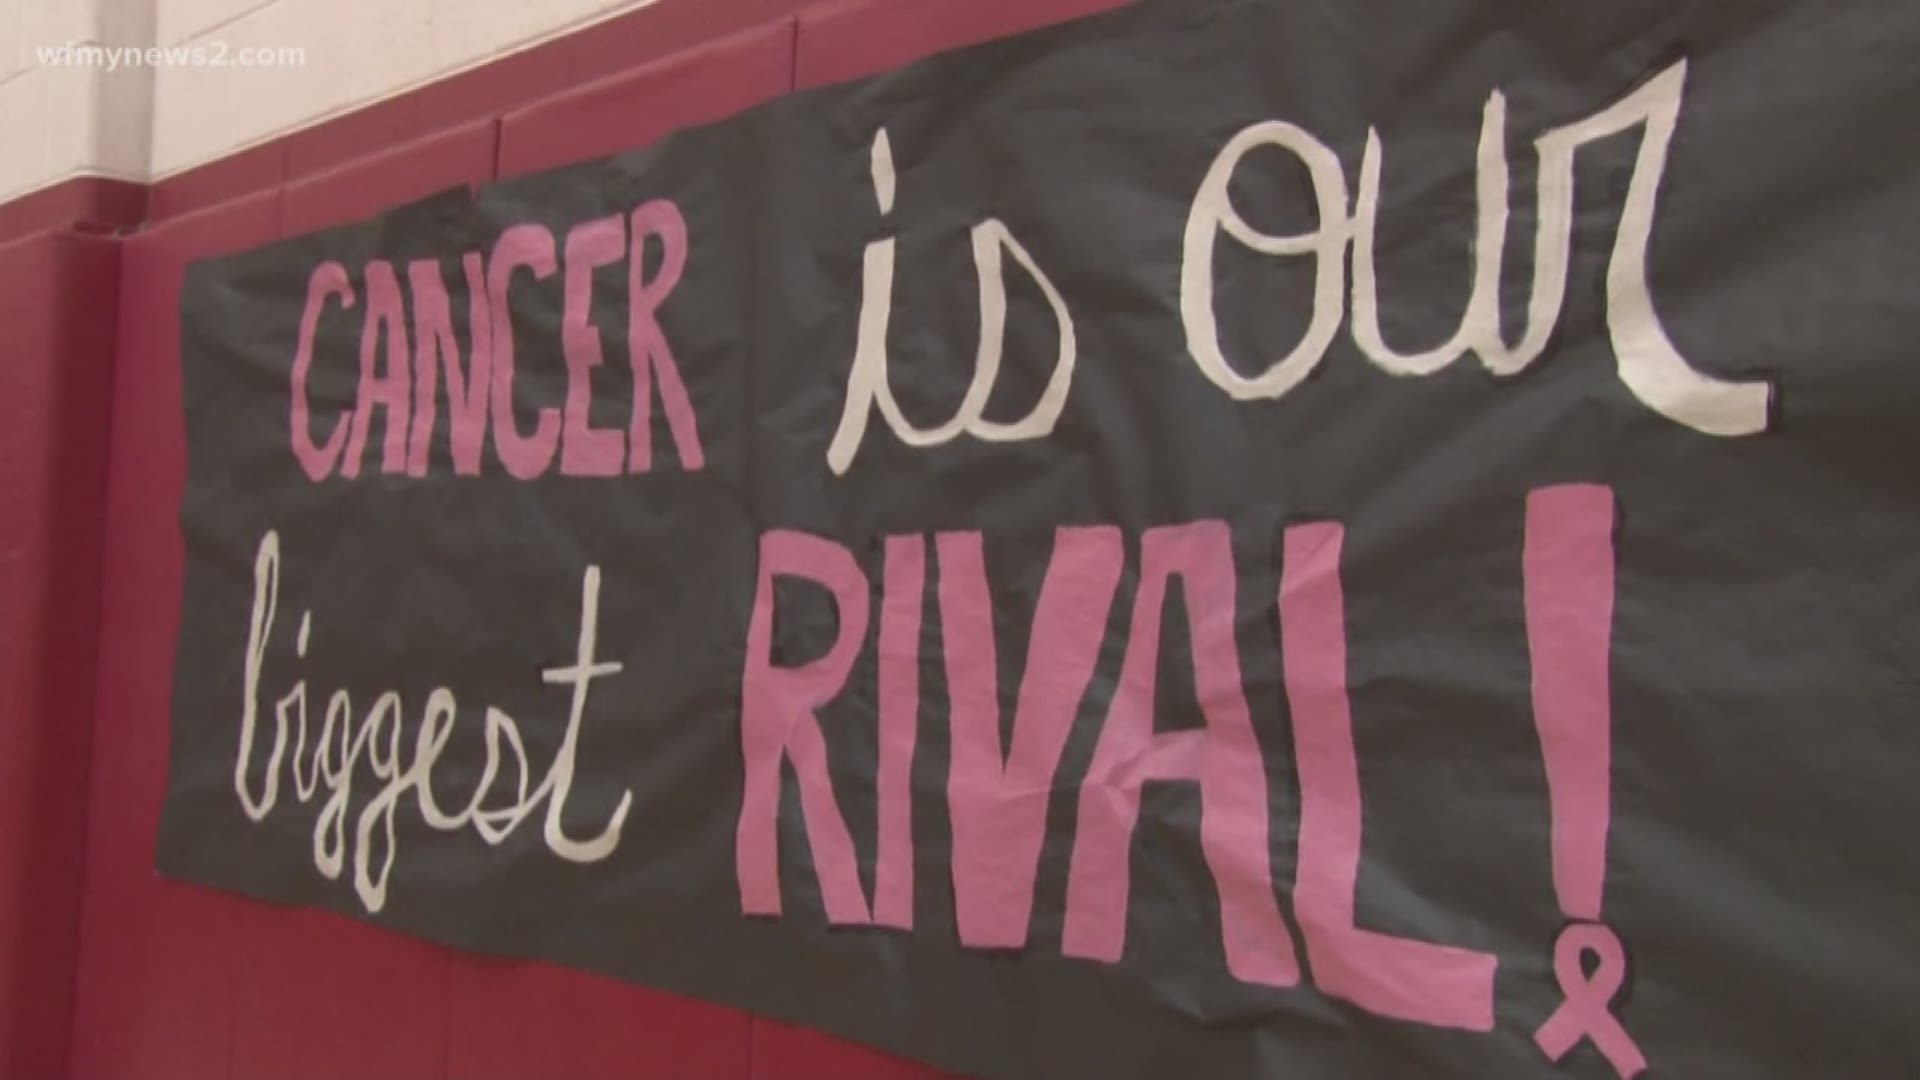 Northern Guilford's head coach battled cancer before, but it came back. Friday night, a former assistant coach and her players all raised money and awareness by wear